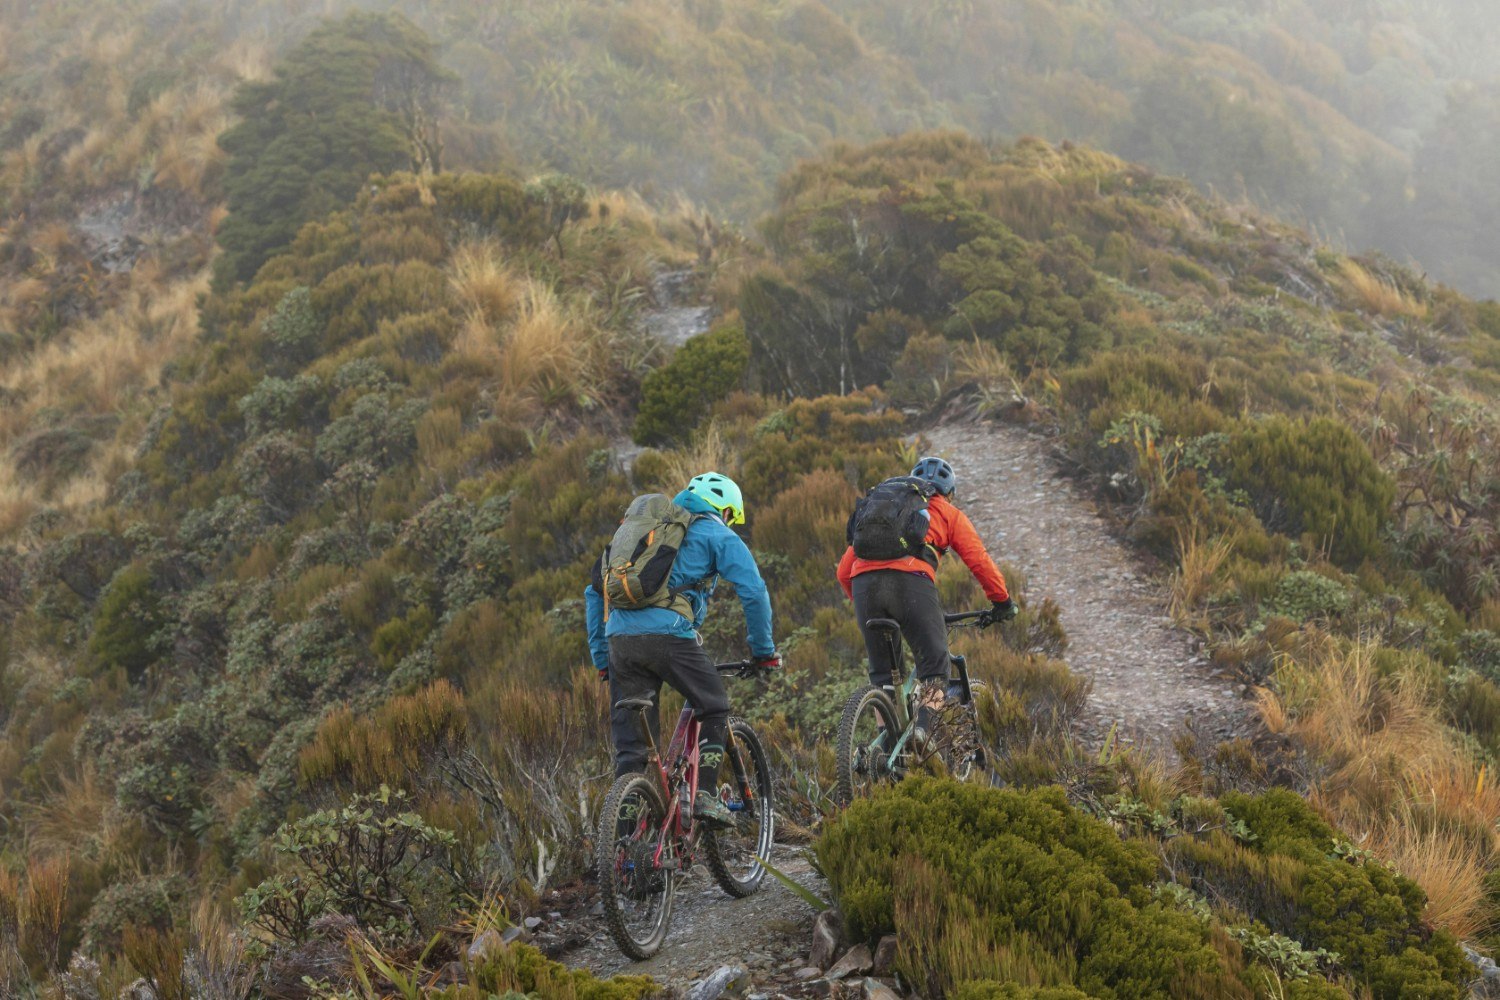 Two mountain bikers on the Paparoa Track, New Zealand; the stretch of narrow track is surrounded by heather and other foliage.